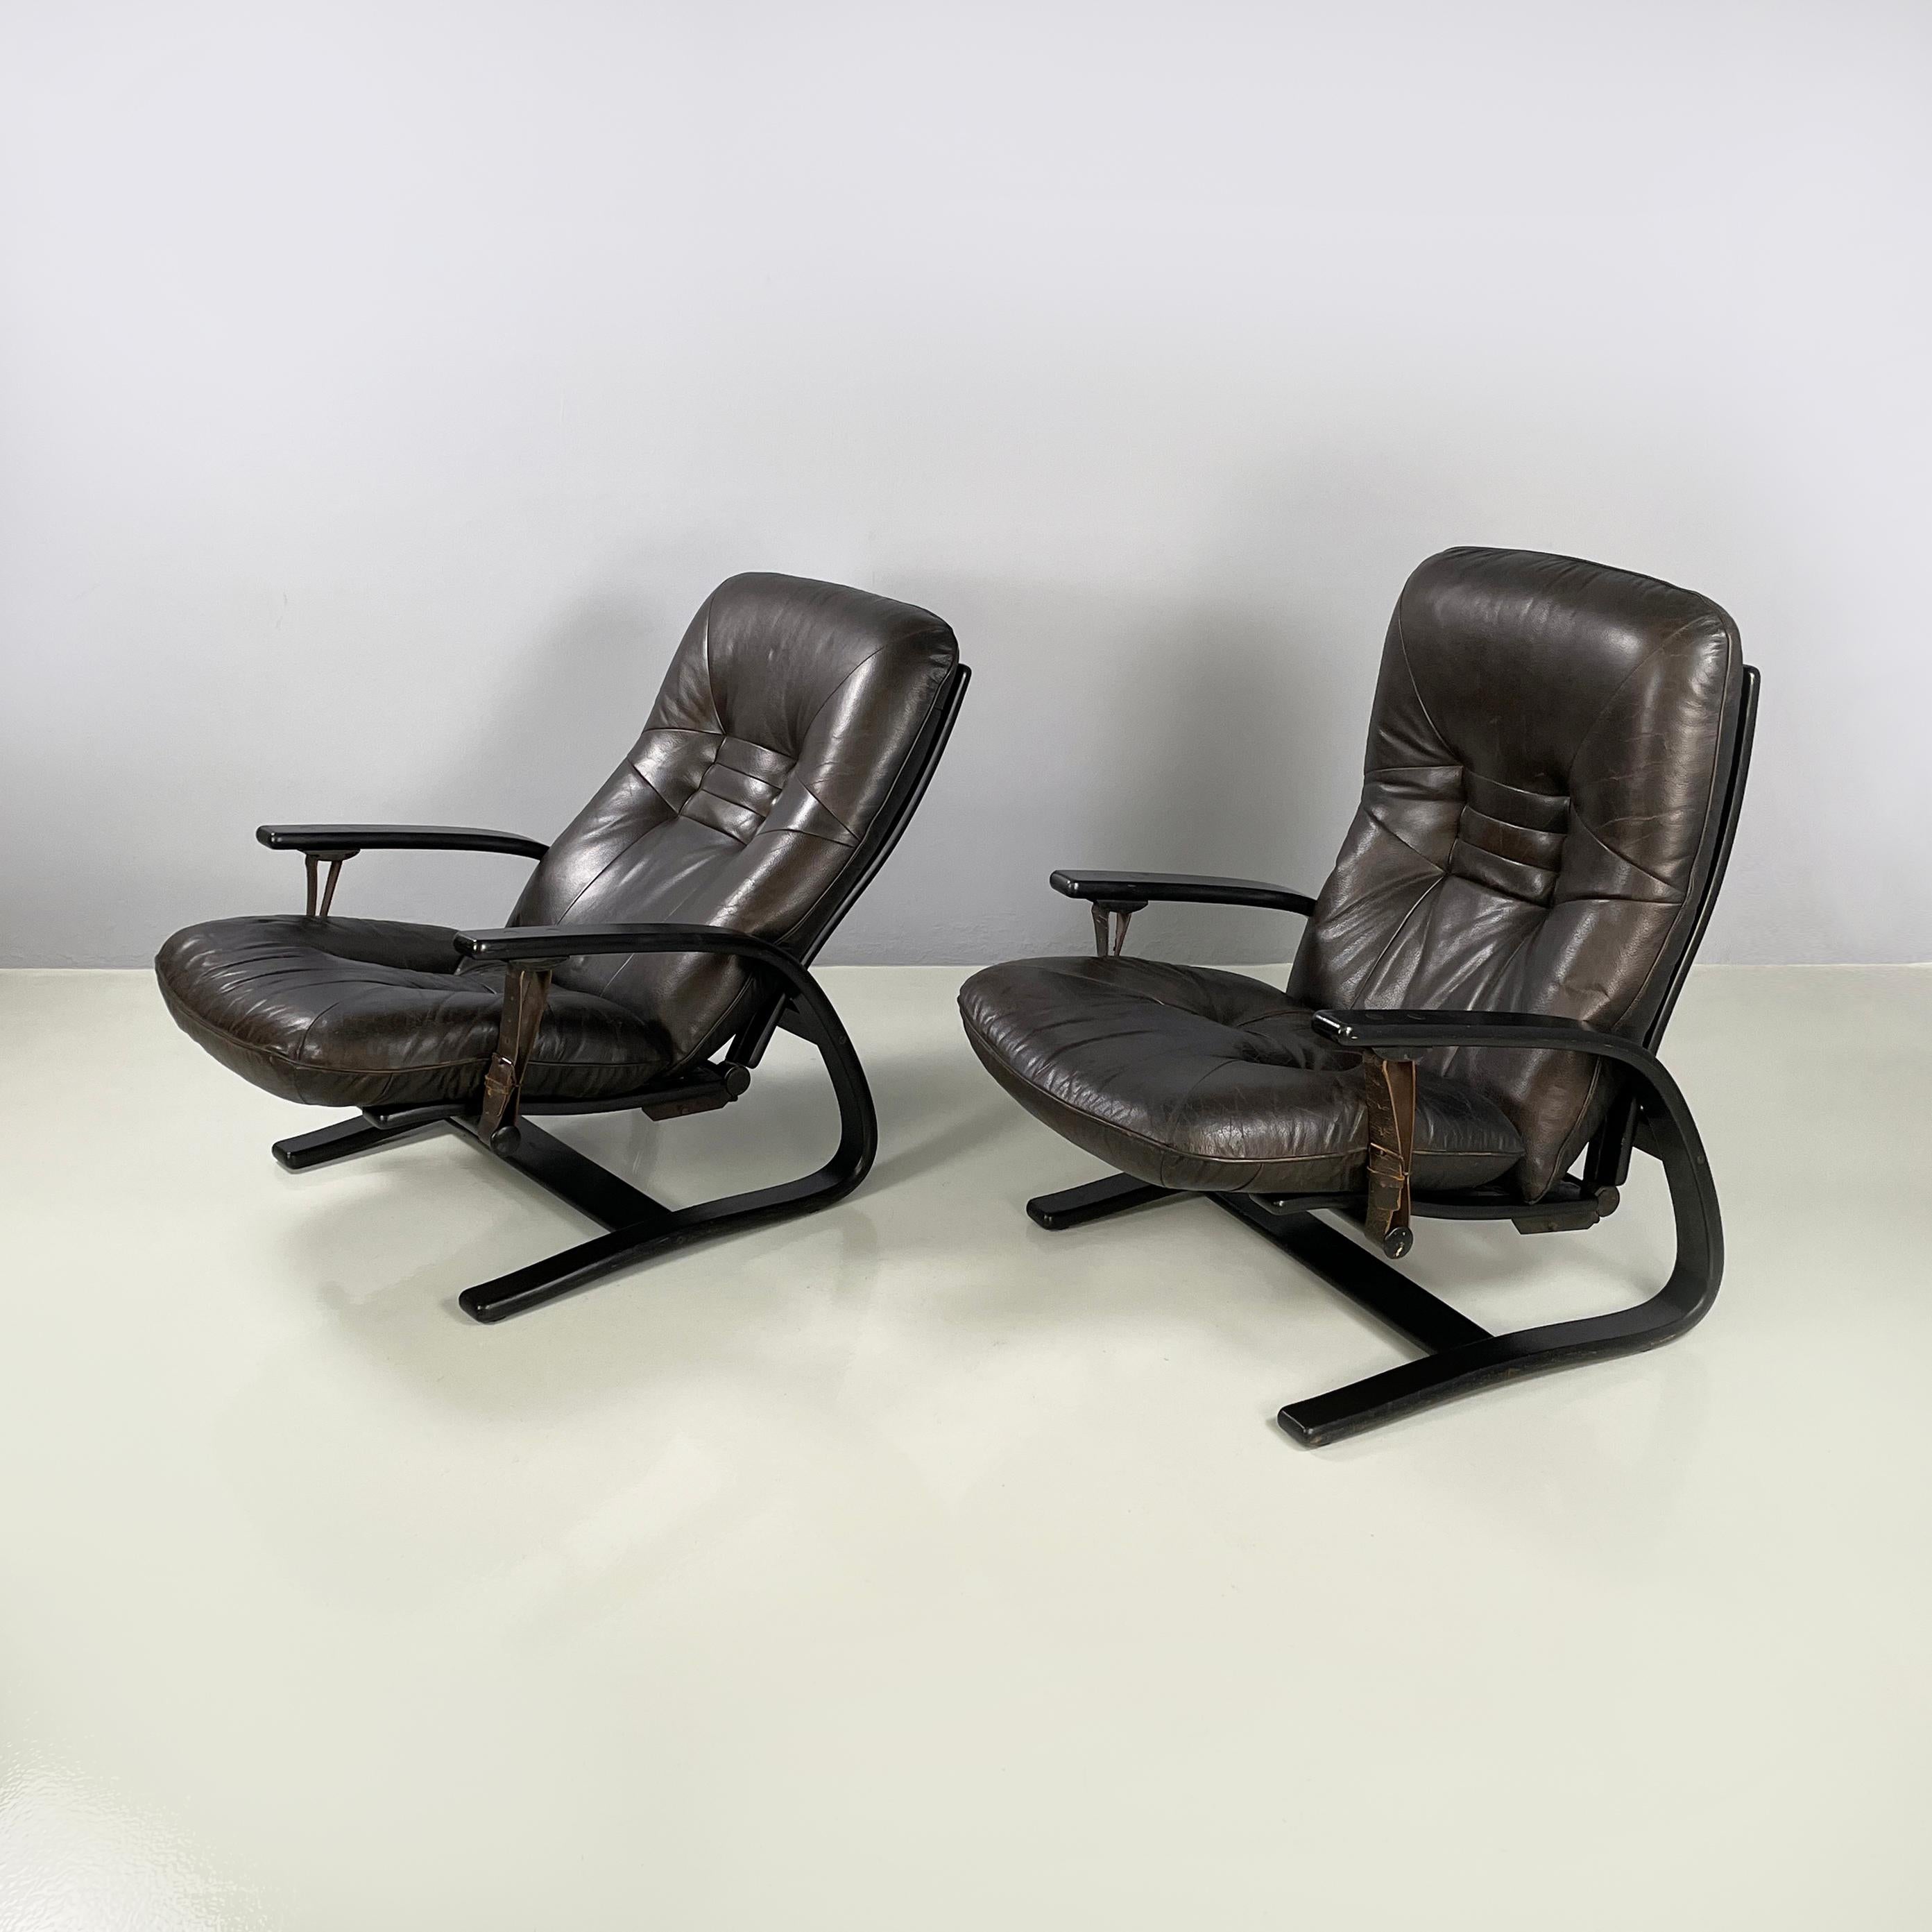 Italian modern Dark brown leather Reclining armchairs and pouf by De Sede, 1970s
Pair of reclining armchairs and pouf in dark brown leather and dark wood. The square back and seat are padded and covered in dark brown leather and feature buttons with